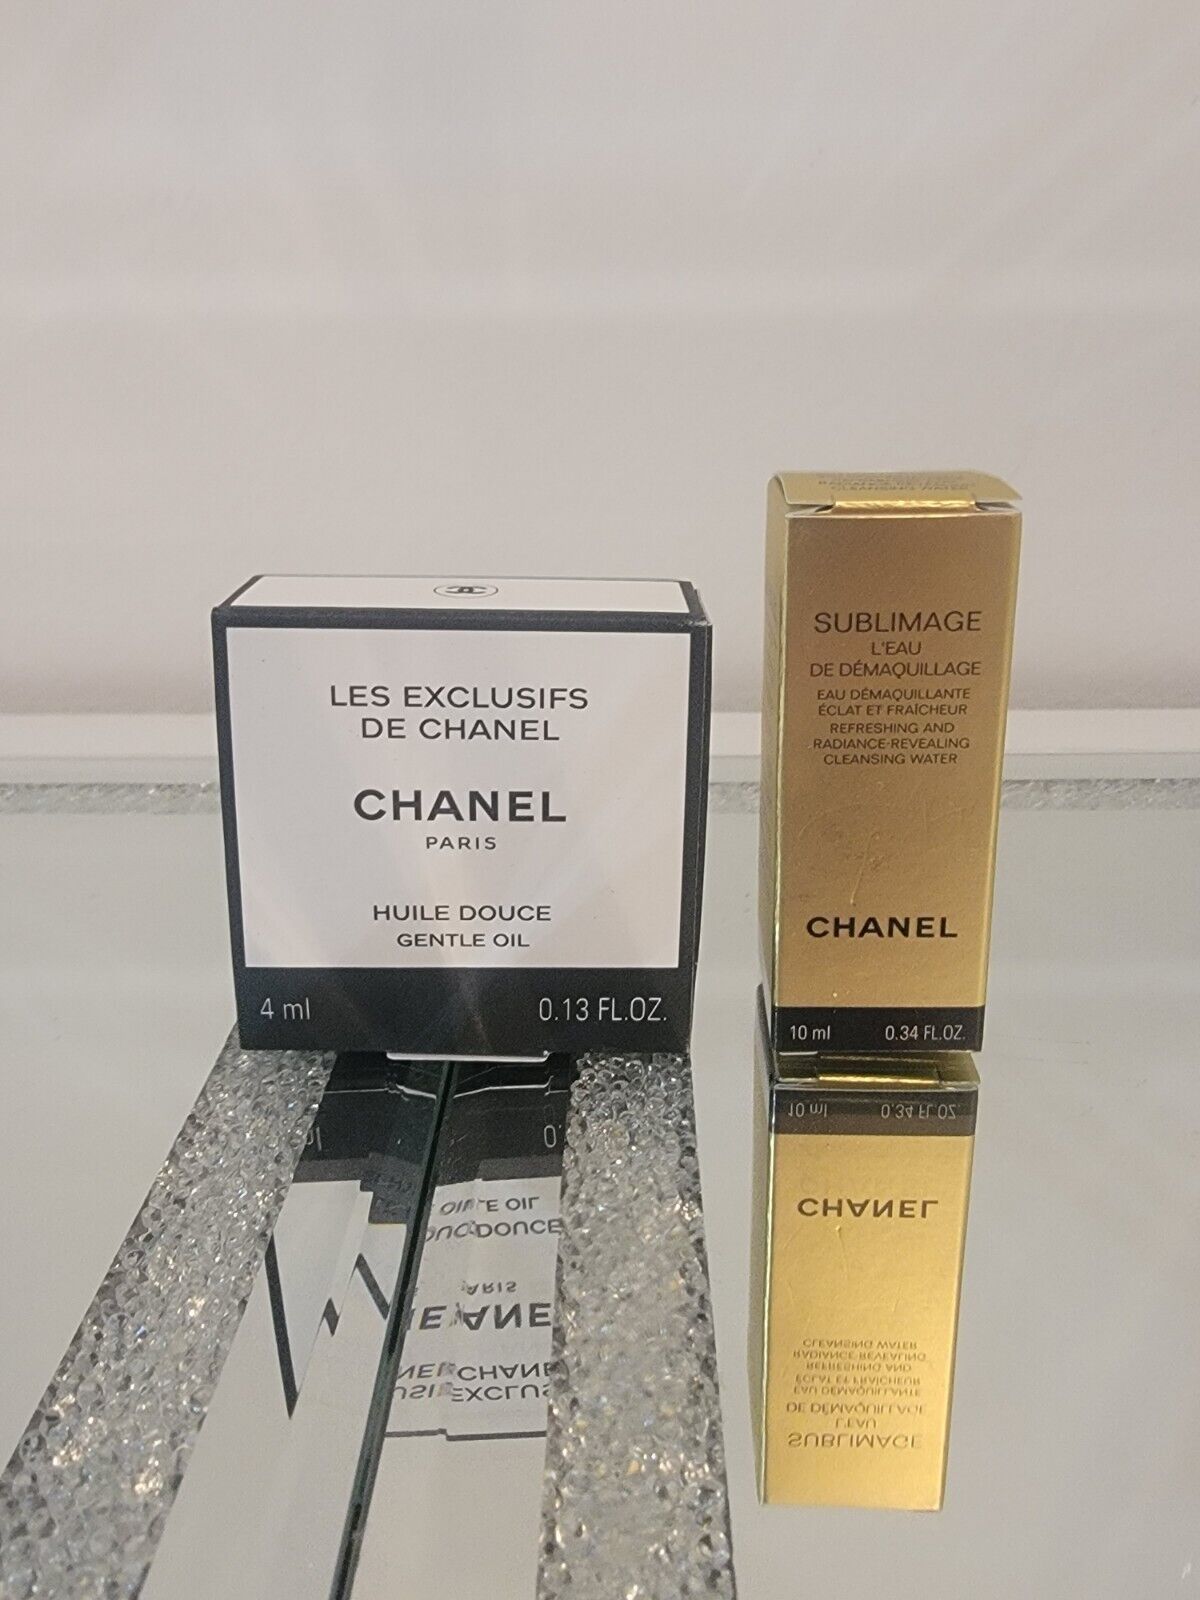 chanel huile douce